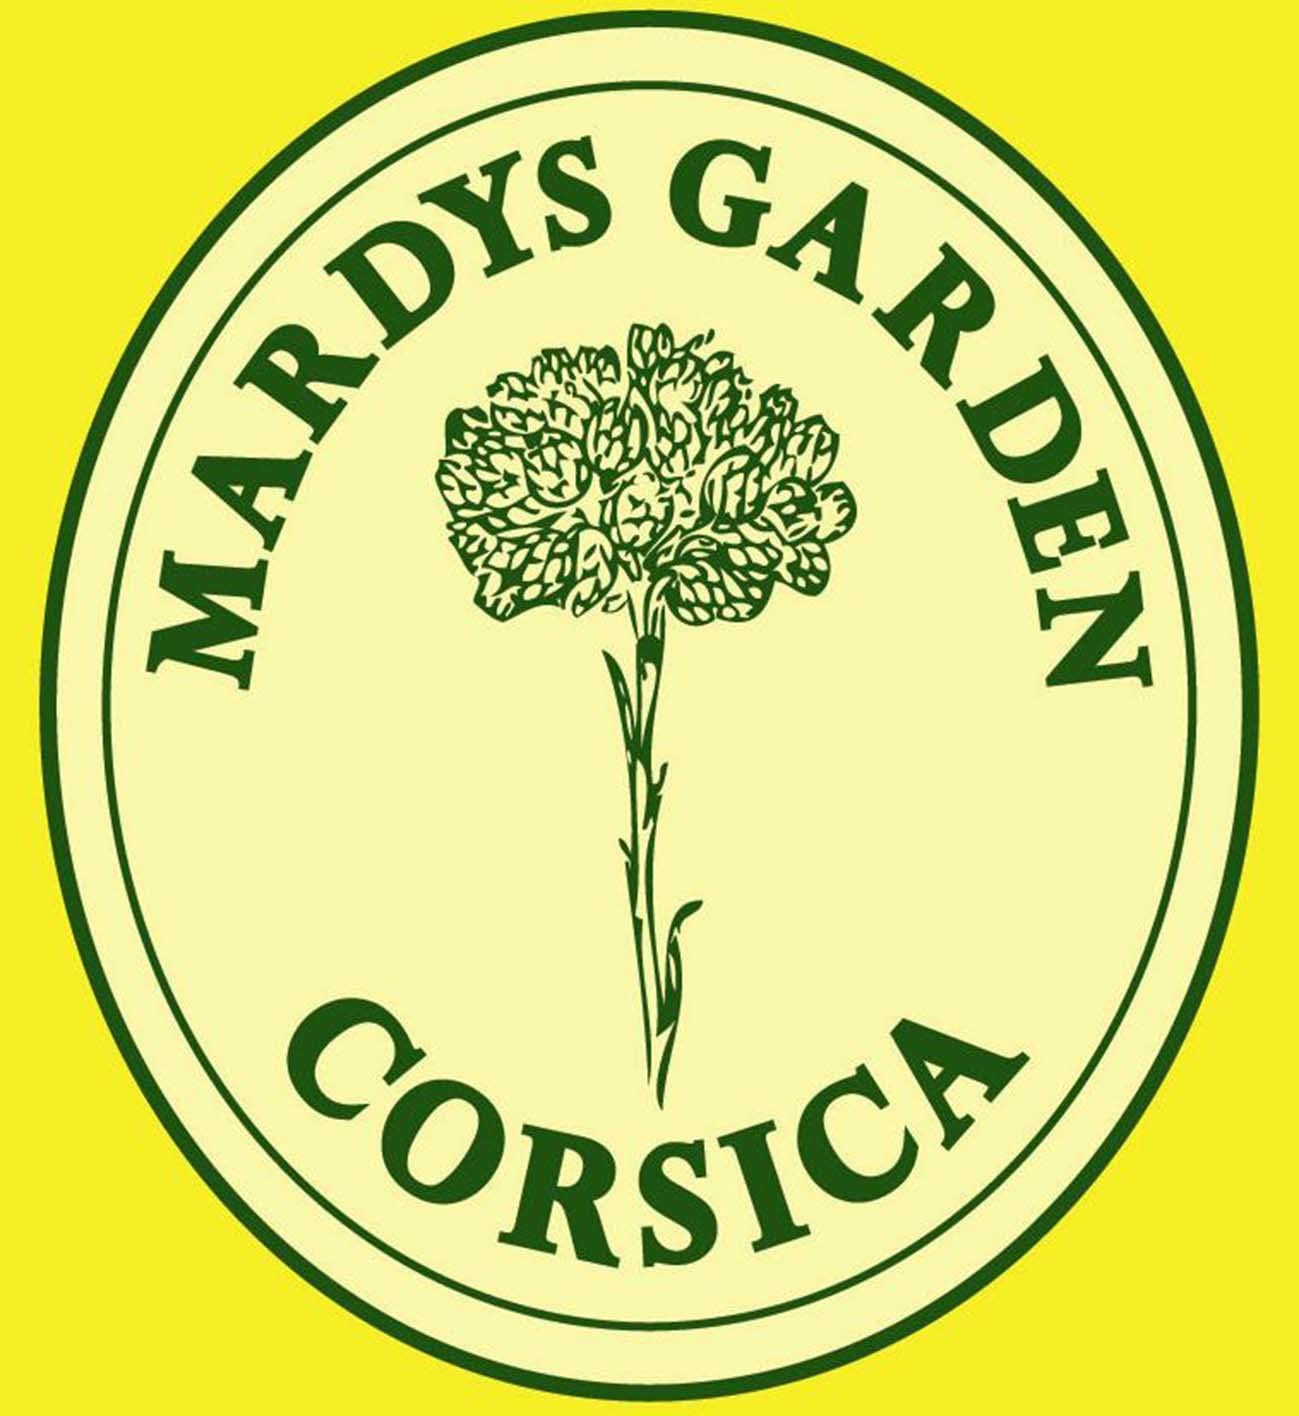 MARDYS GARDEN logo. Organic farmer since 2008, certified by Bureau Veritas. We live on our farm in Corsica, France. Near the sun and under good sun exposure we cultivate organic Immortelle, Mastic and Myrtle. It grows wild here in Corsica